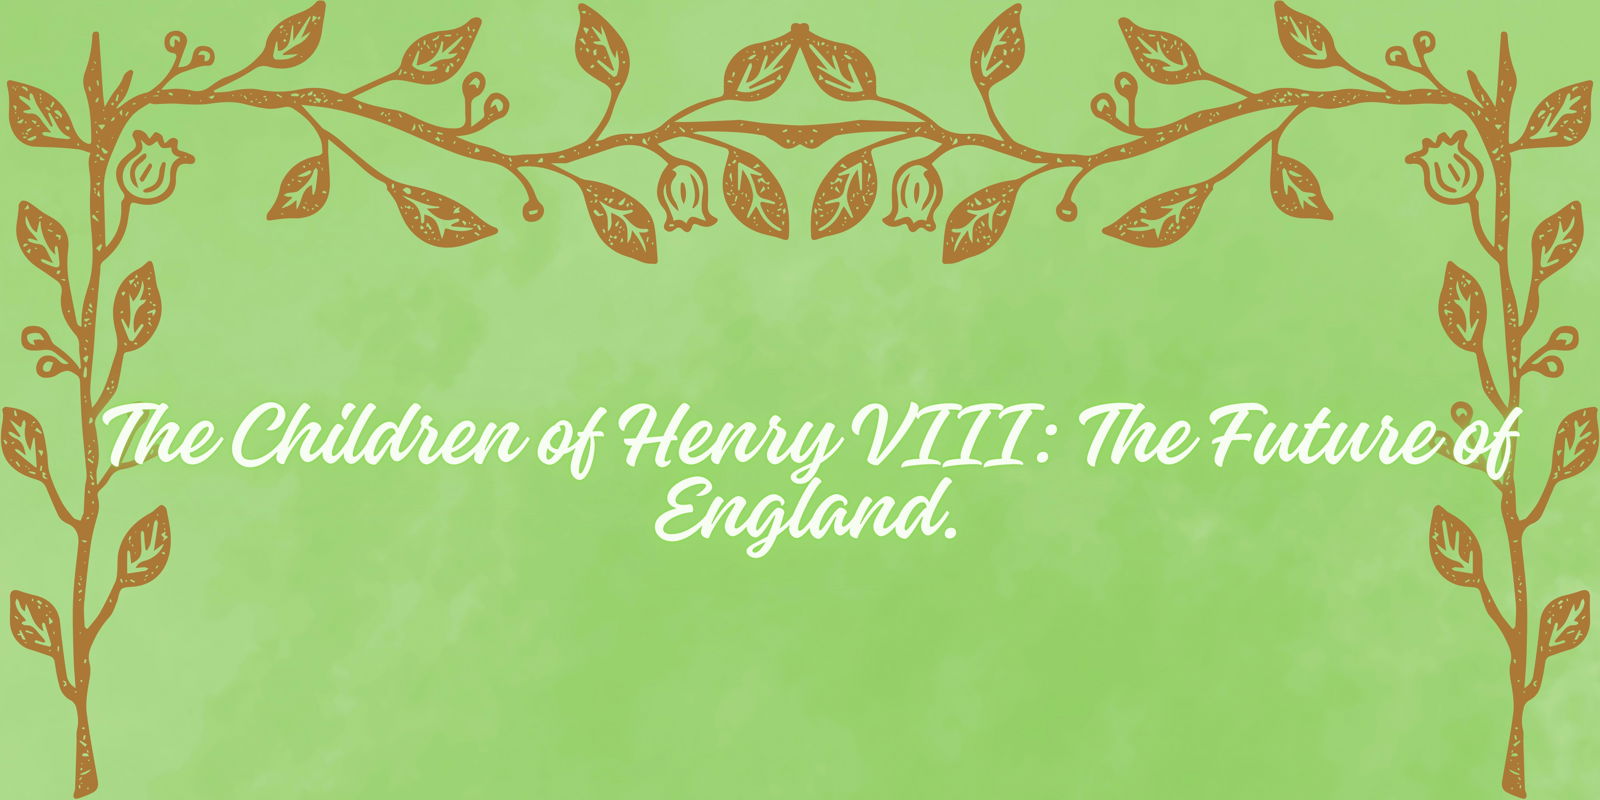 The Children of Henry VIII: The Future of England.